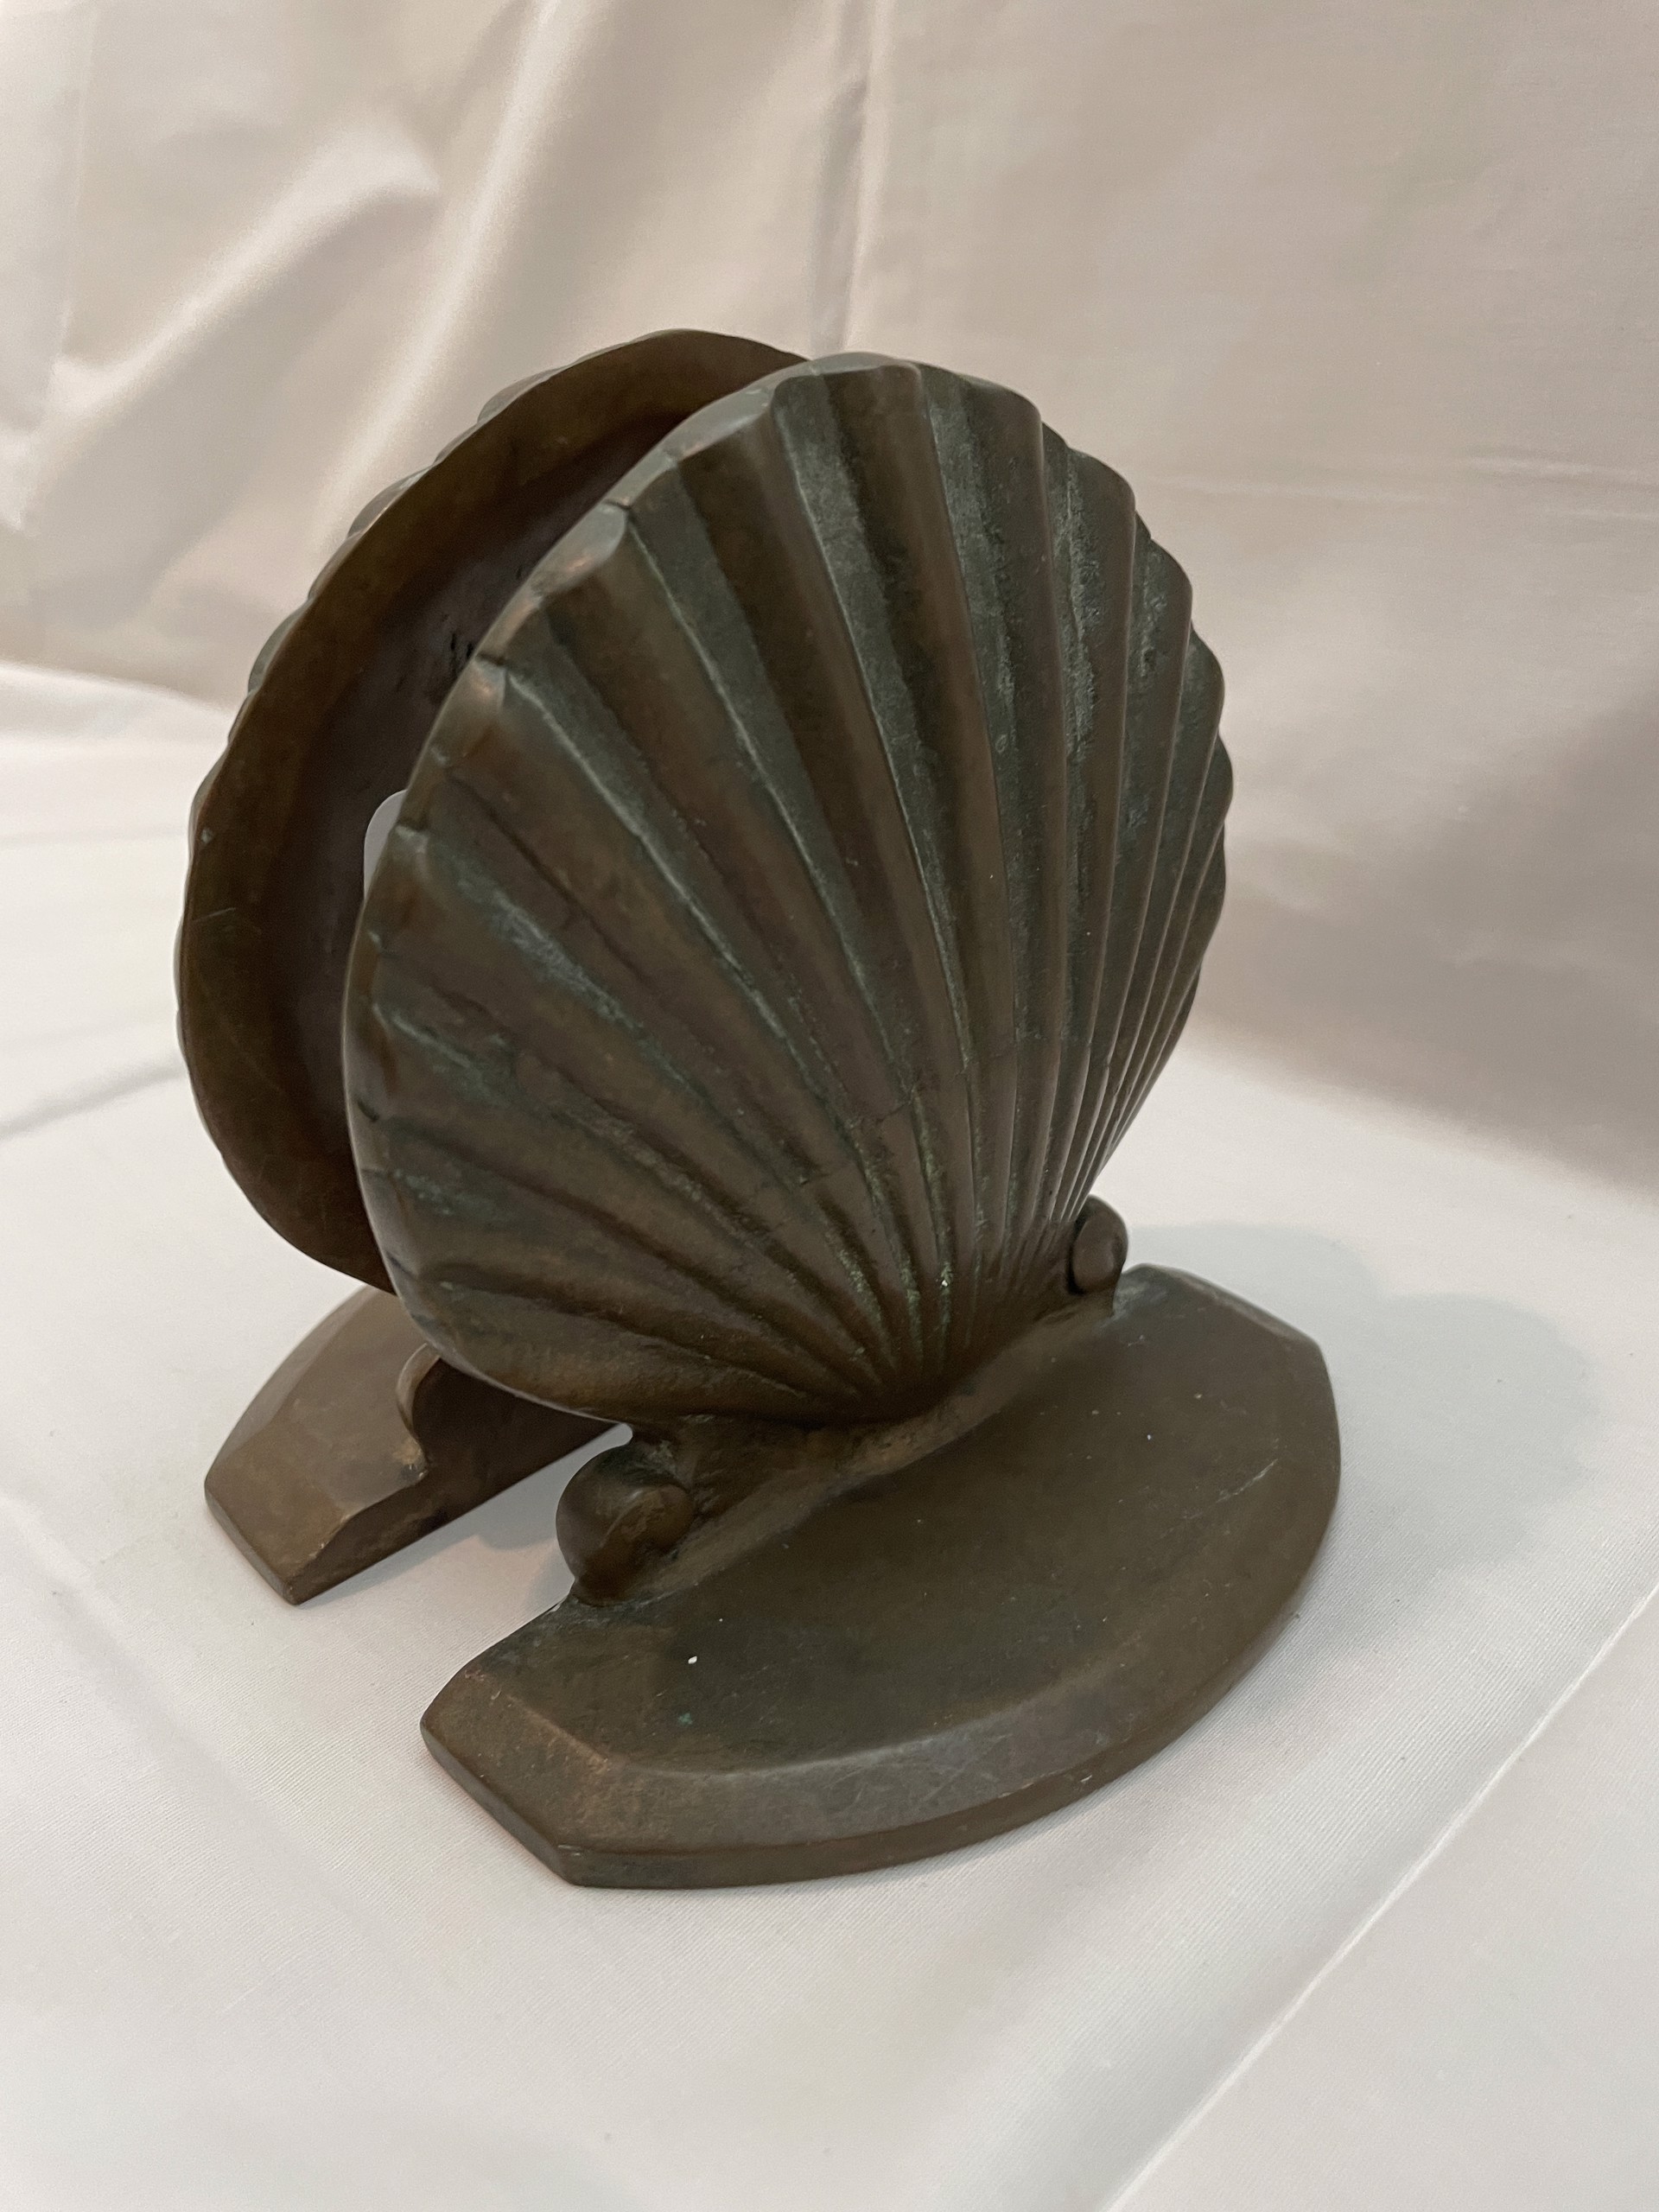 Shell Bookends by William Boogar